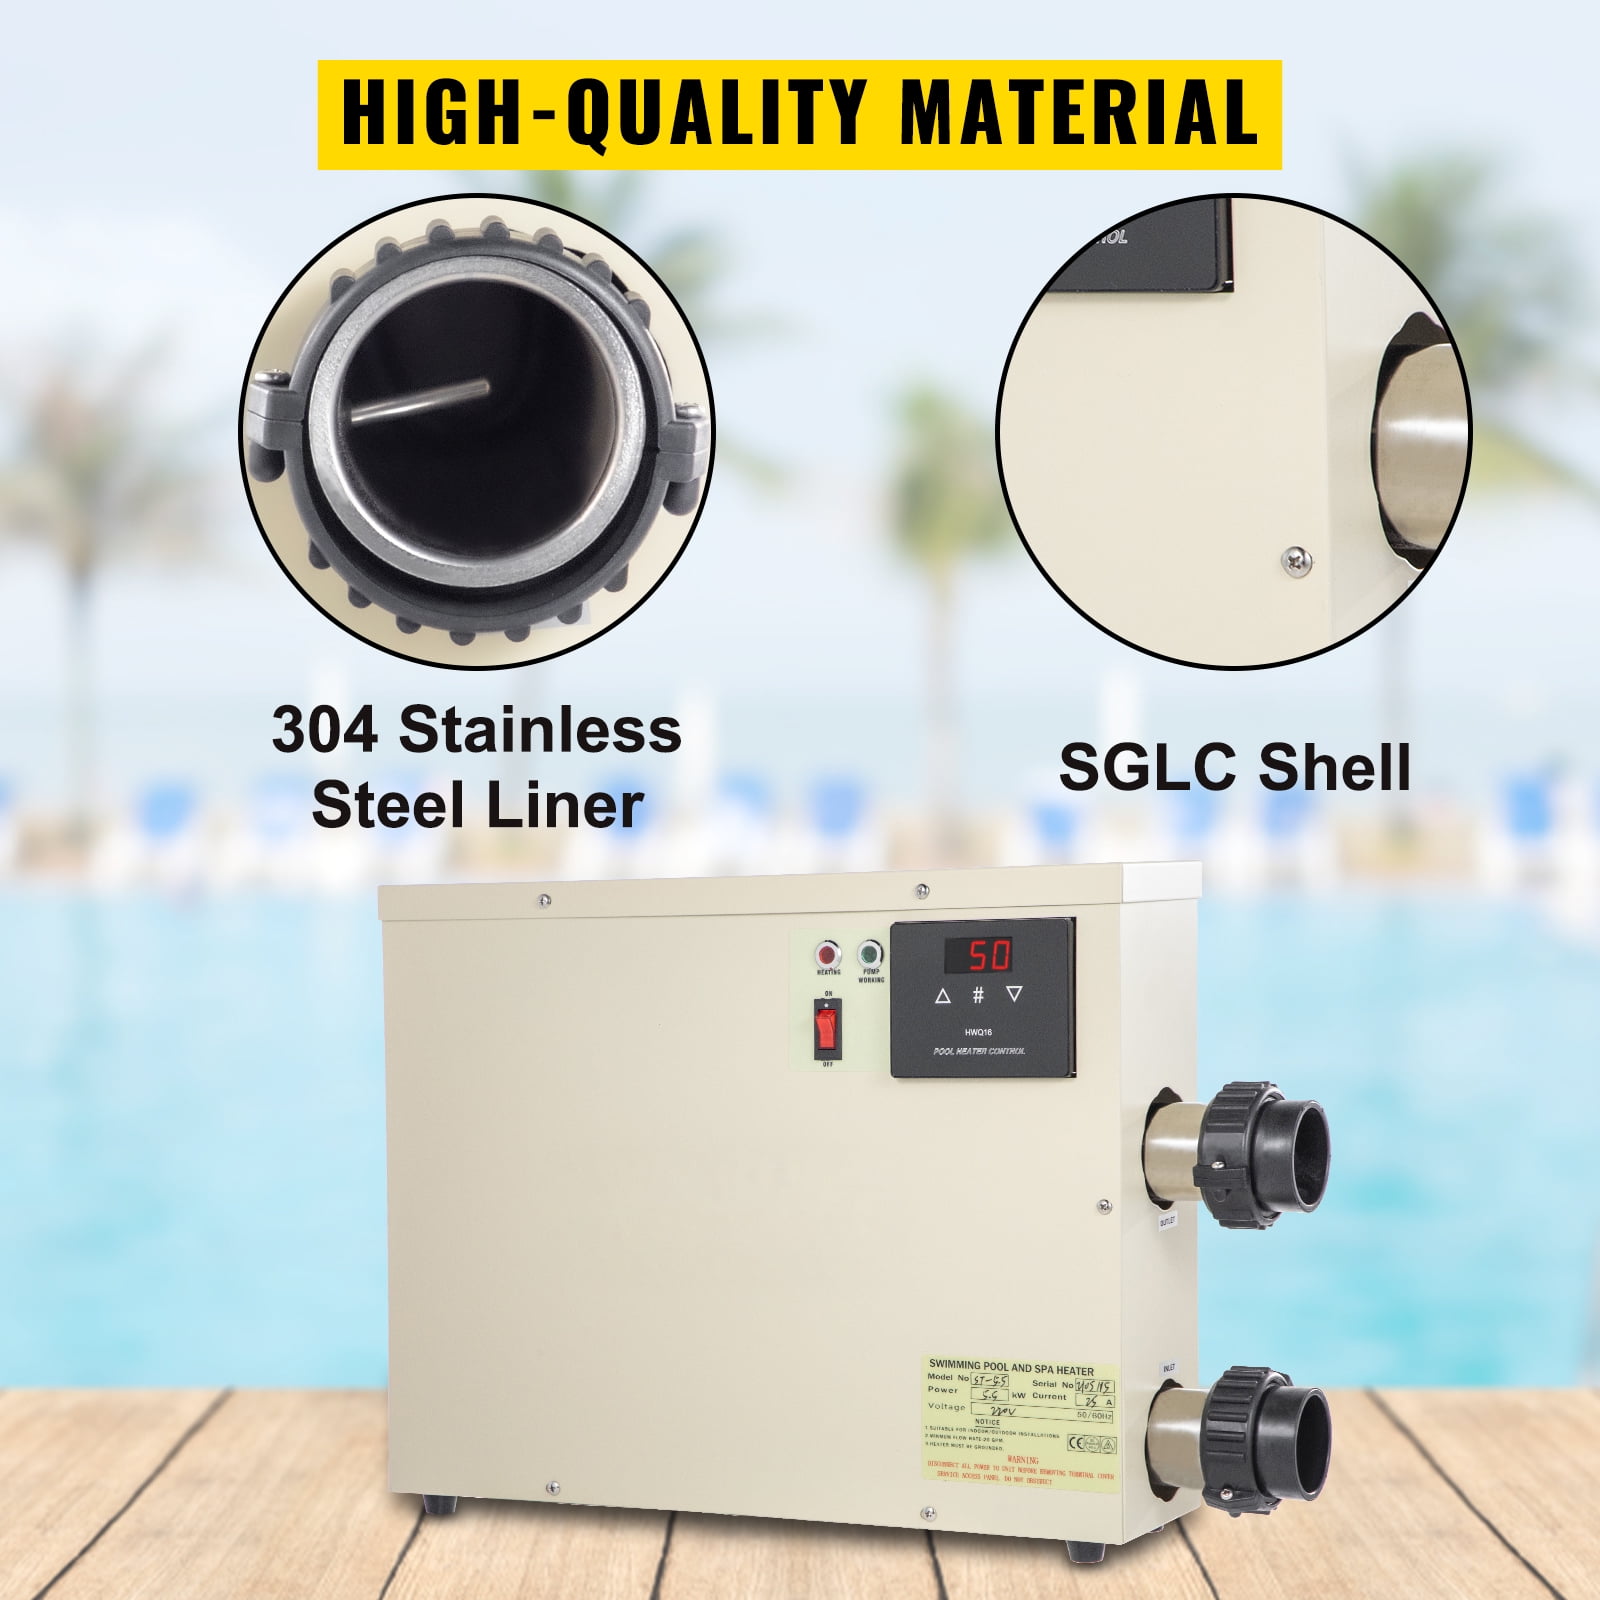 Swimming Pool Electric Heater SPA Heater Electric Assistant Digital fit for Thermostat DOMINTY Electric Pool Heater 11KW 220V for Above Ground Inground Pools 